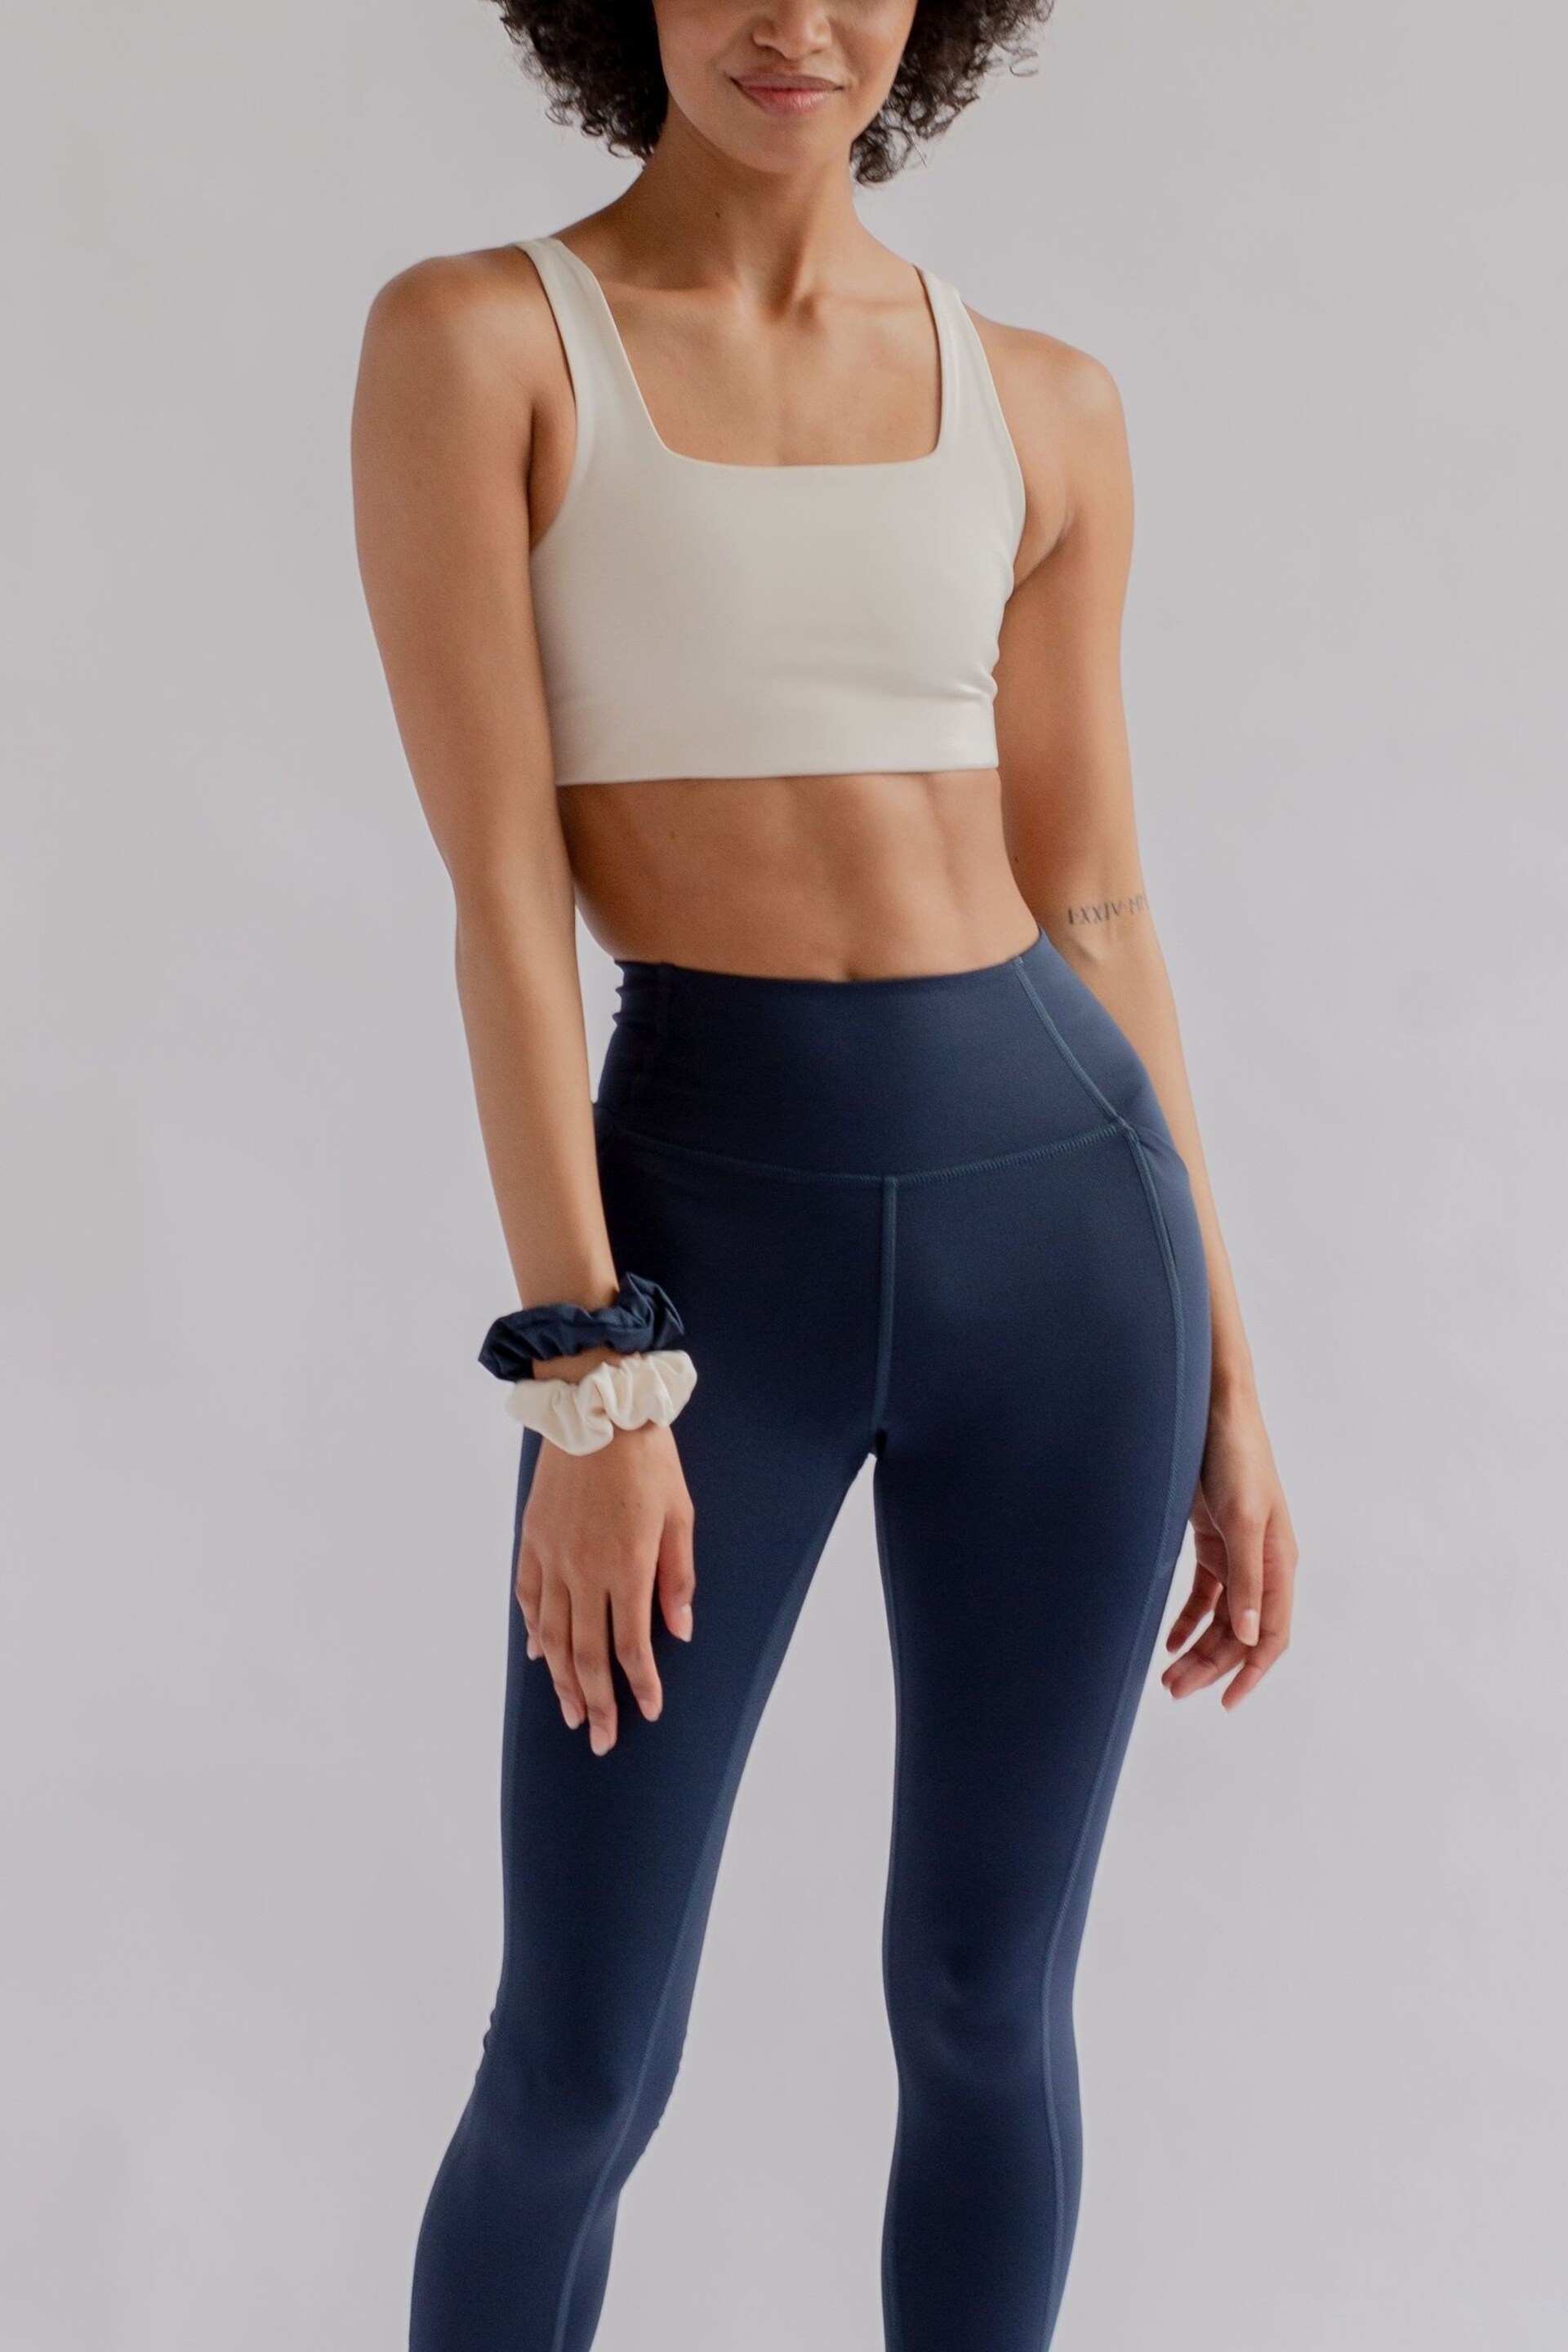 Girlfriend Collective High Rise Pocket Leggings - Image 1 of 8